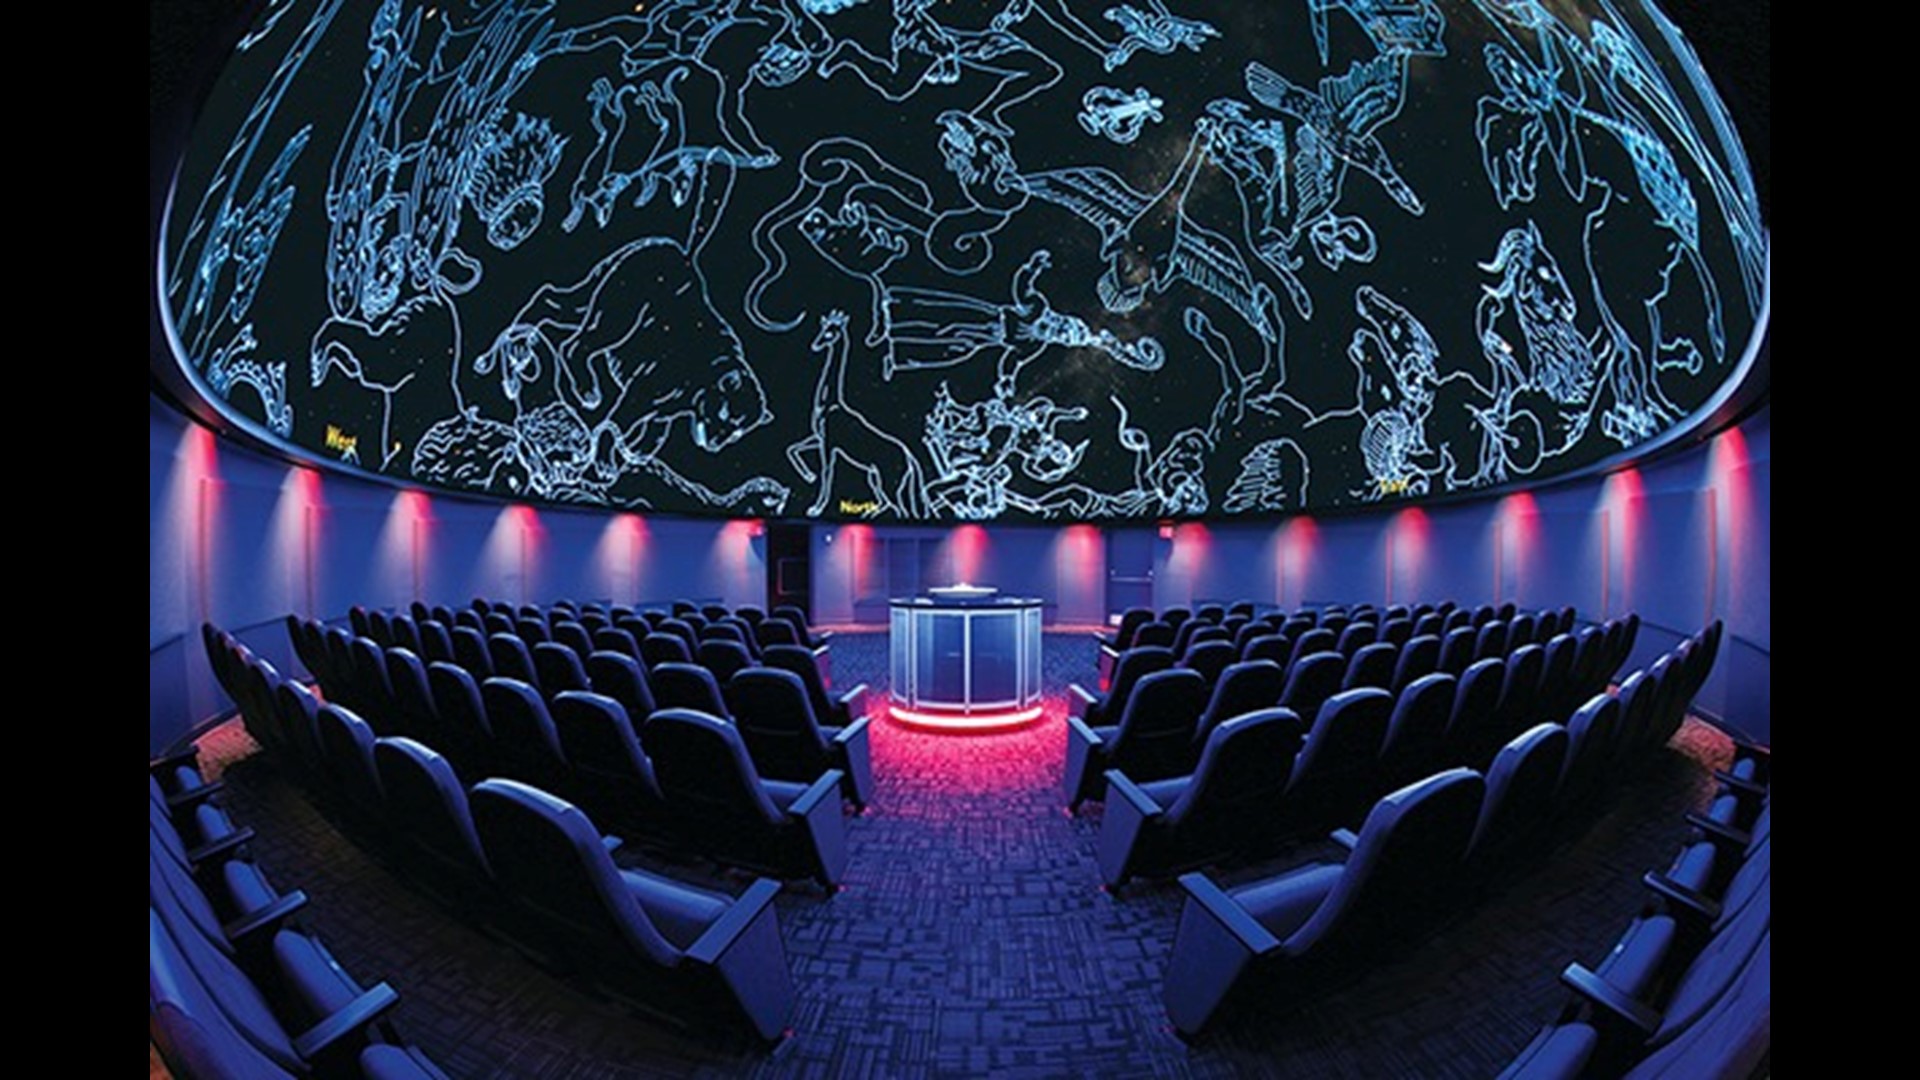 Starting next Thursday, the museum will be hosting full dome film viewings in their planetarium. The films have been edited specifically for the museum's dome.